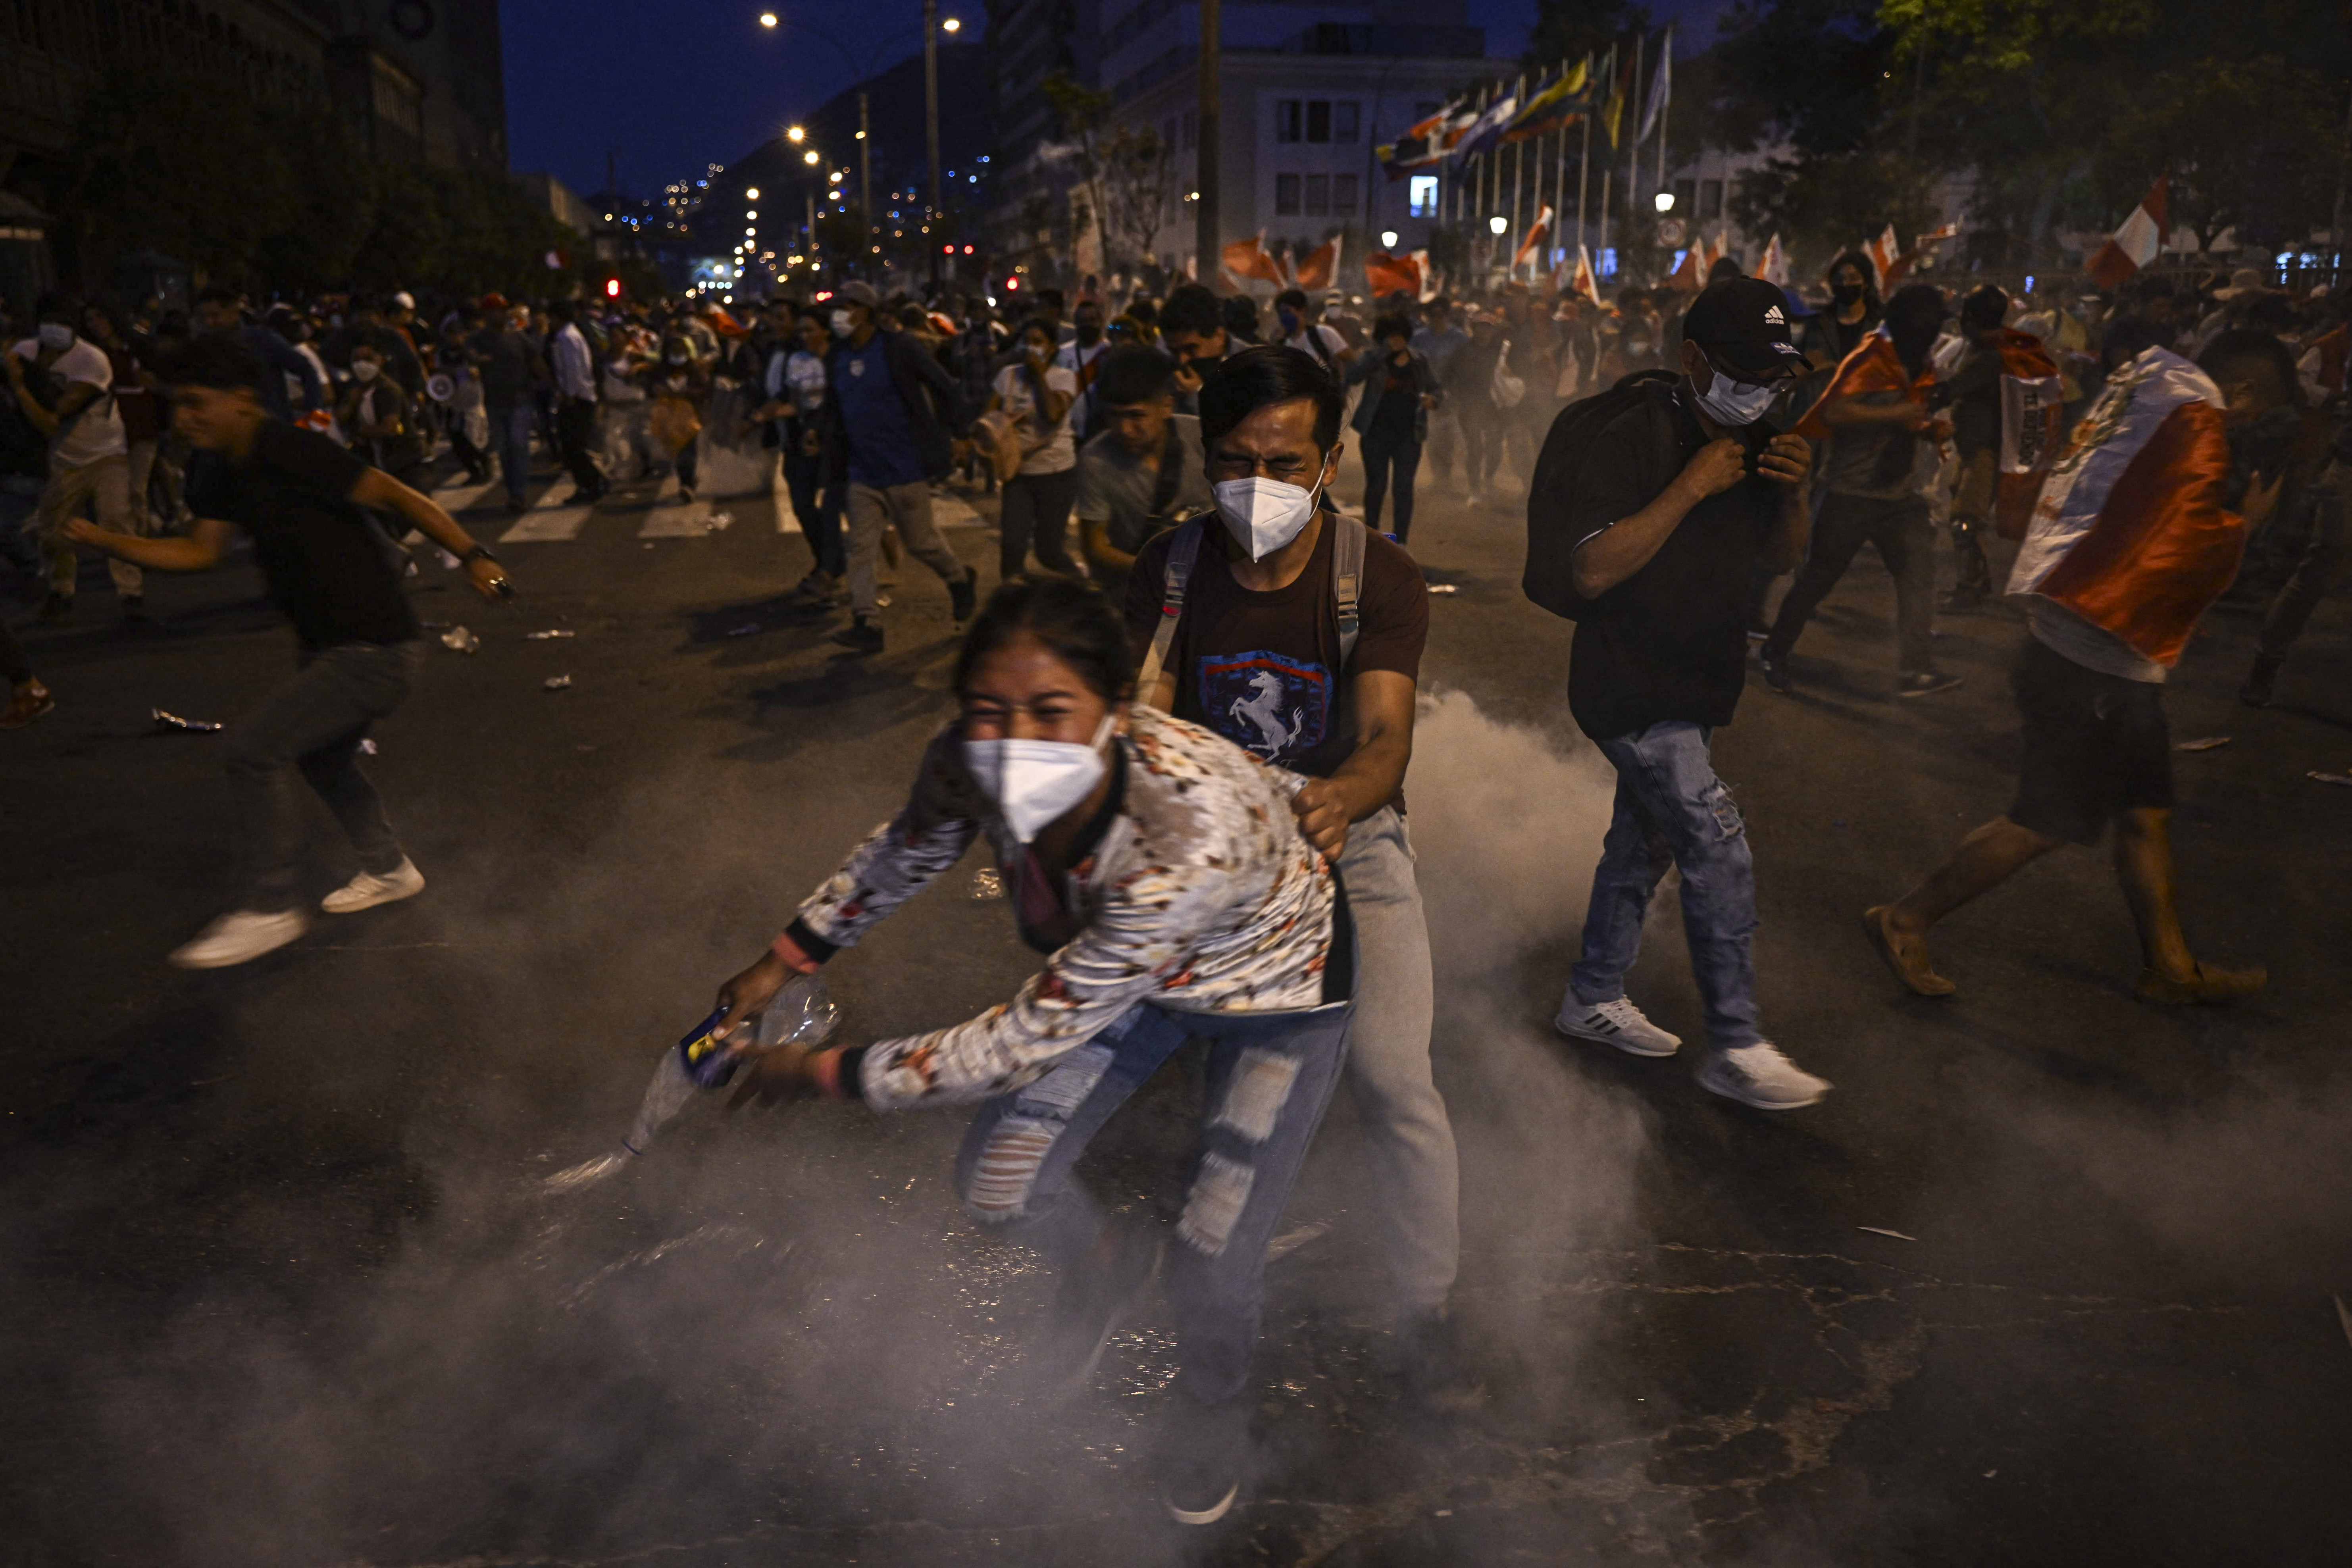 Supporters of former President Pedro Castillo take cover from tear gas thrown by the police during clashes on a demonstration demanding his release and the closure of the Peruvian Congress in Lima, on December 11, 2022. - Two people died and at least five people were injured on Sunday during growing protests against Peru's President Dina Boluarte after the failed coup and the arrest of former President Pedro Castillo. (Photo by ERNESTO BENAVIDES / AFP)